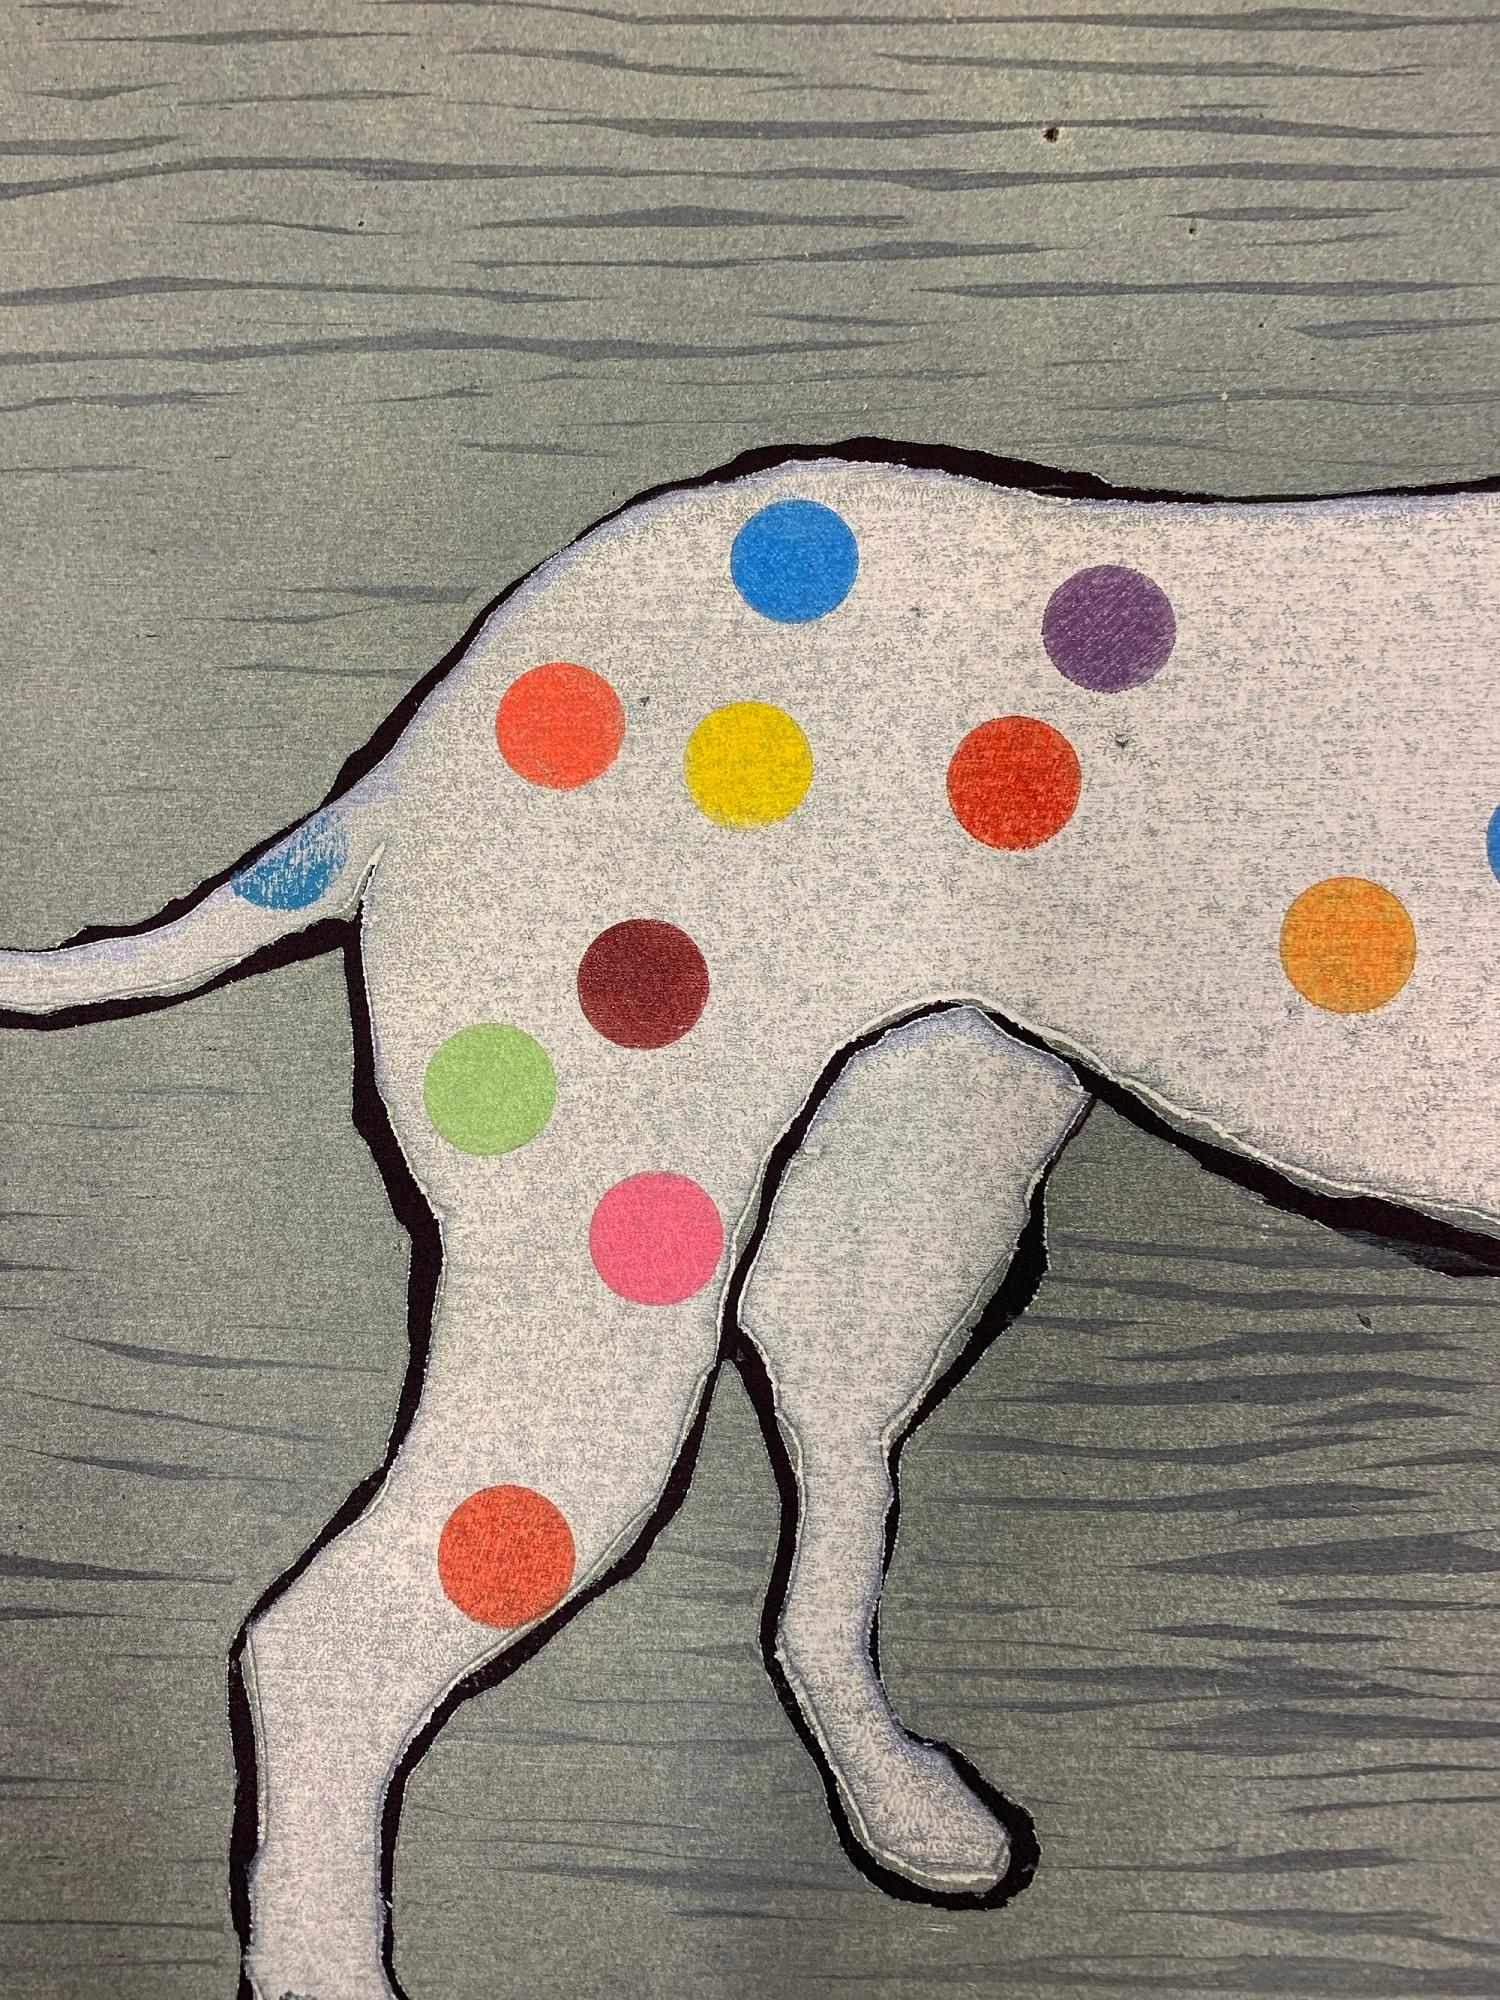 Damien Hirst's Dog, Pictures of Famous Artist's Pets, Damien Hirst Spots Style For Sale 2